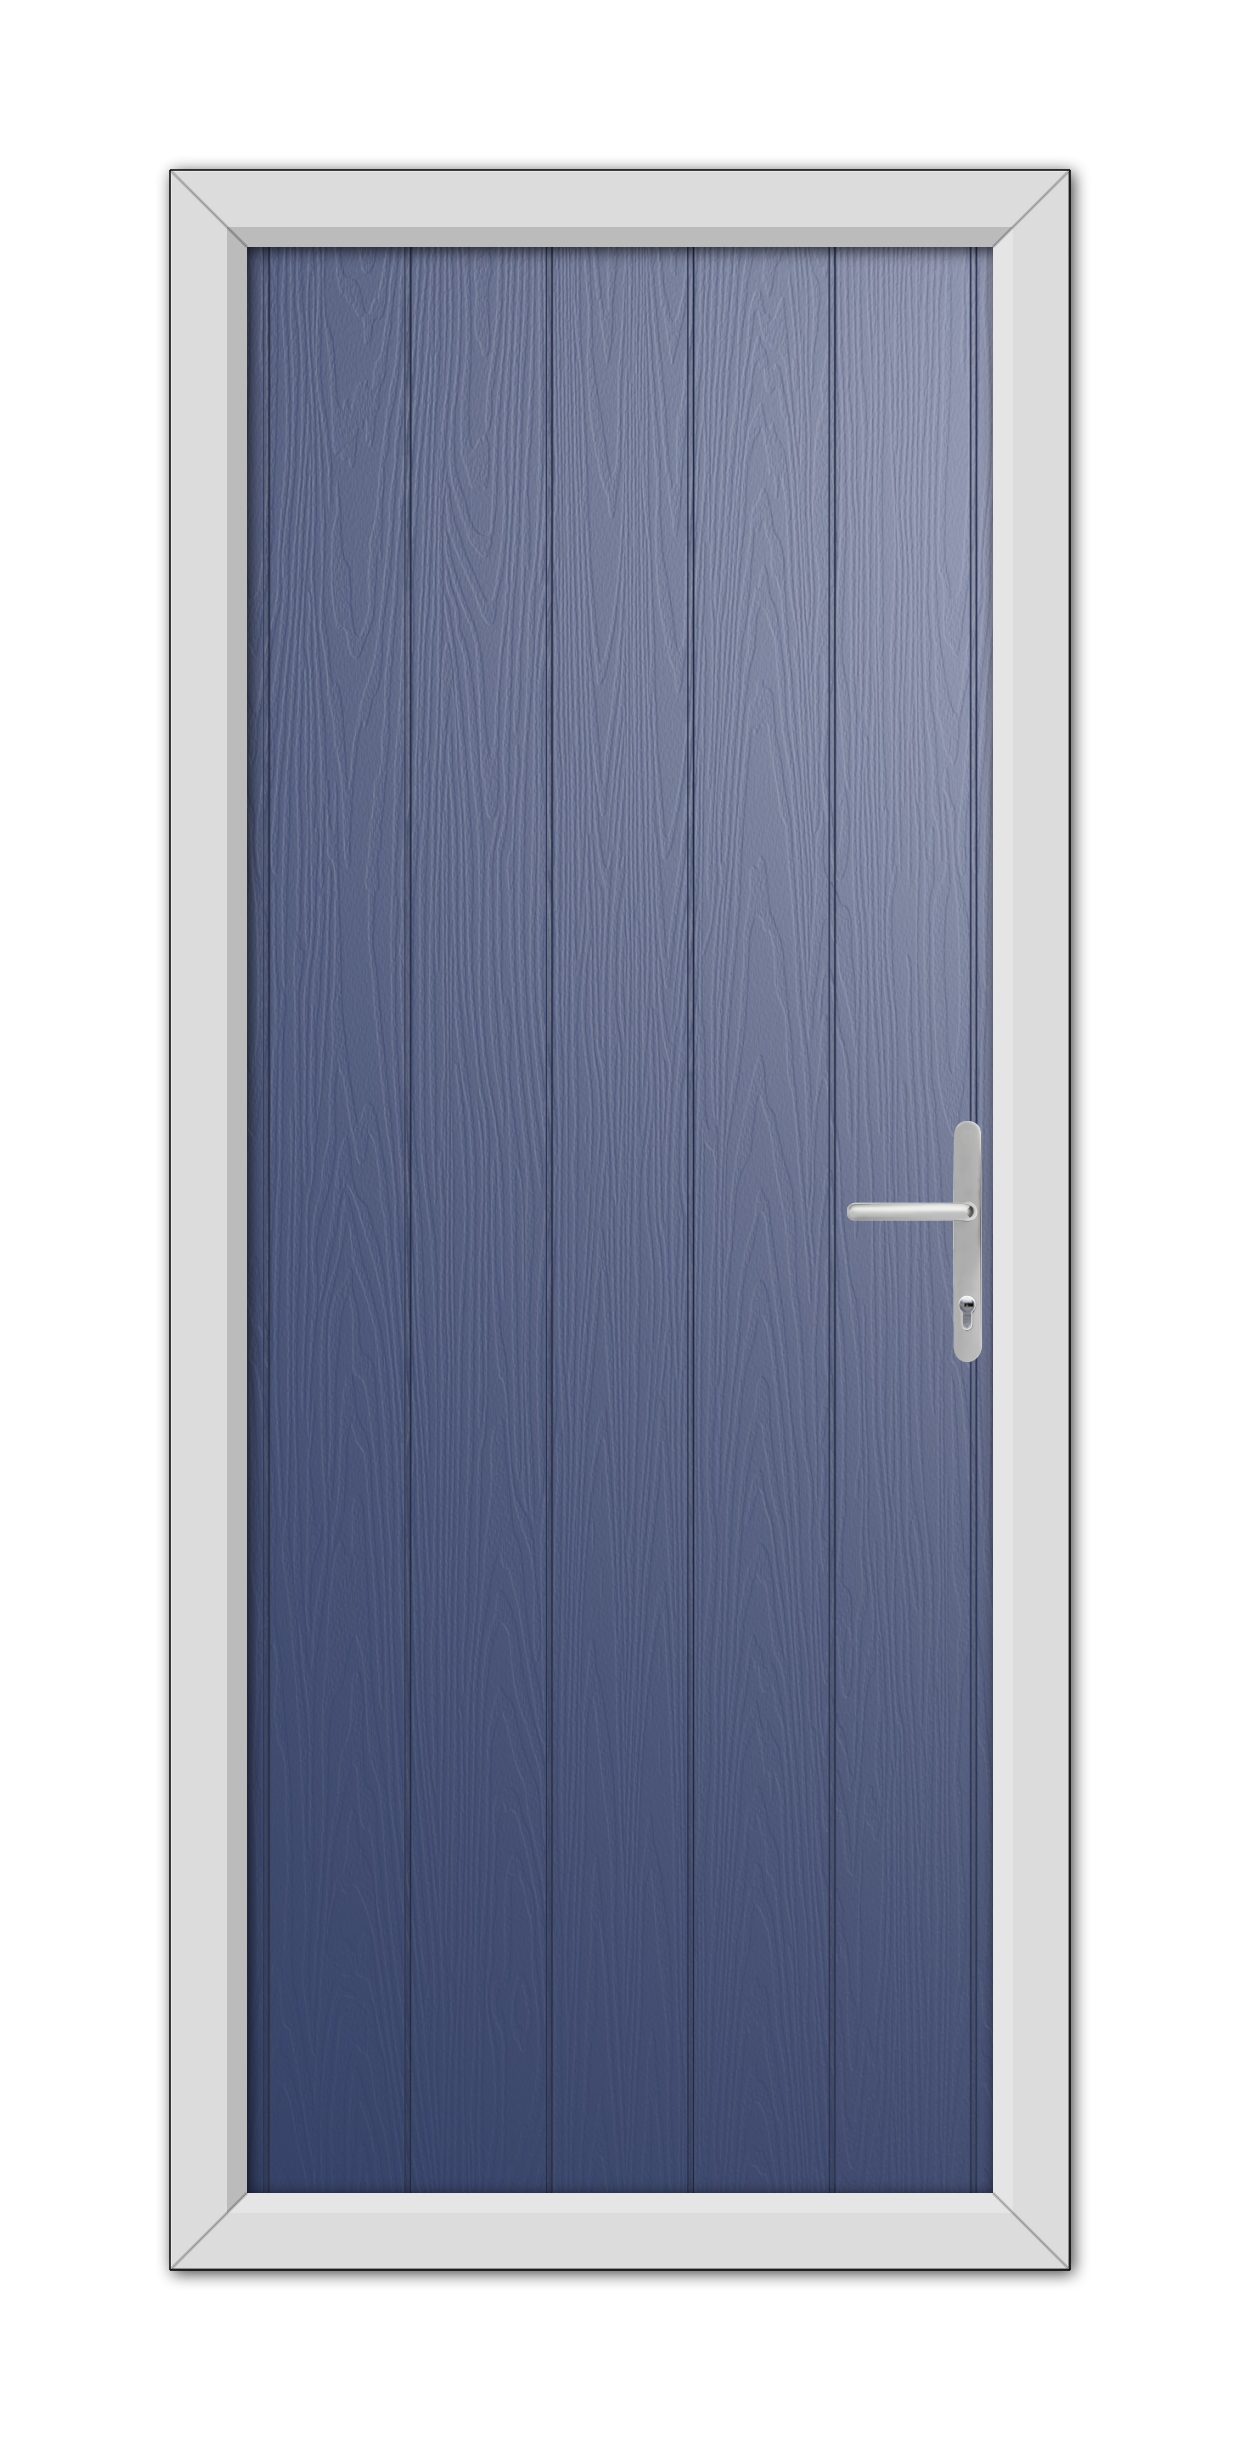 A Blue Norfolk Solid Composite Door 48mm Timber Core with a silver handle, set within a white door frame, viewed frontally.